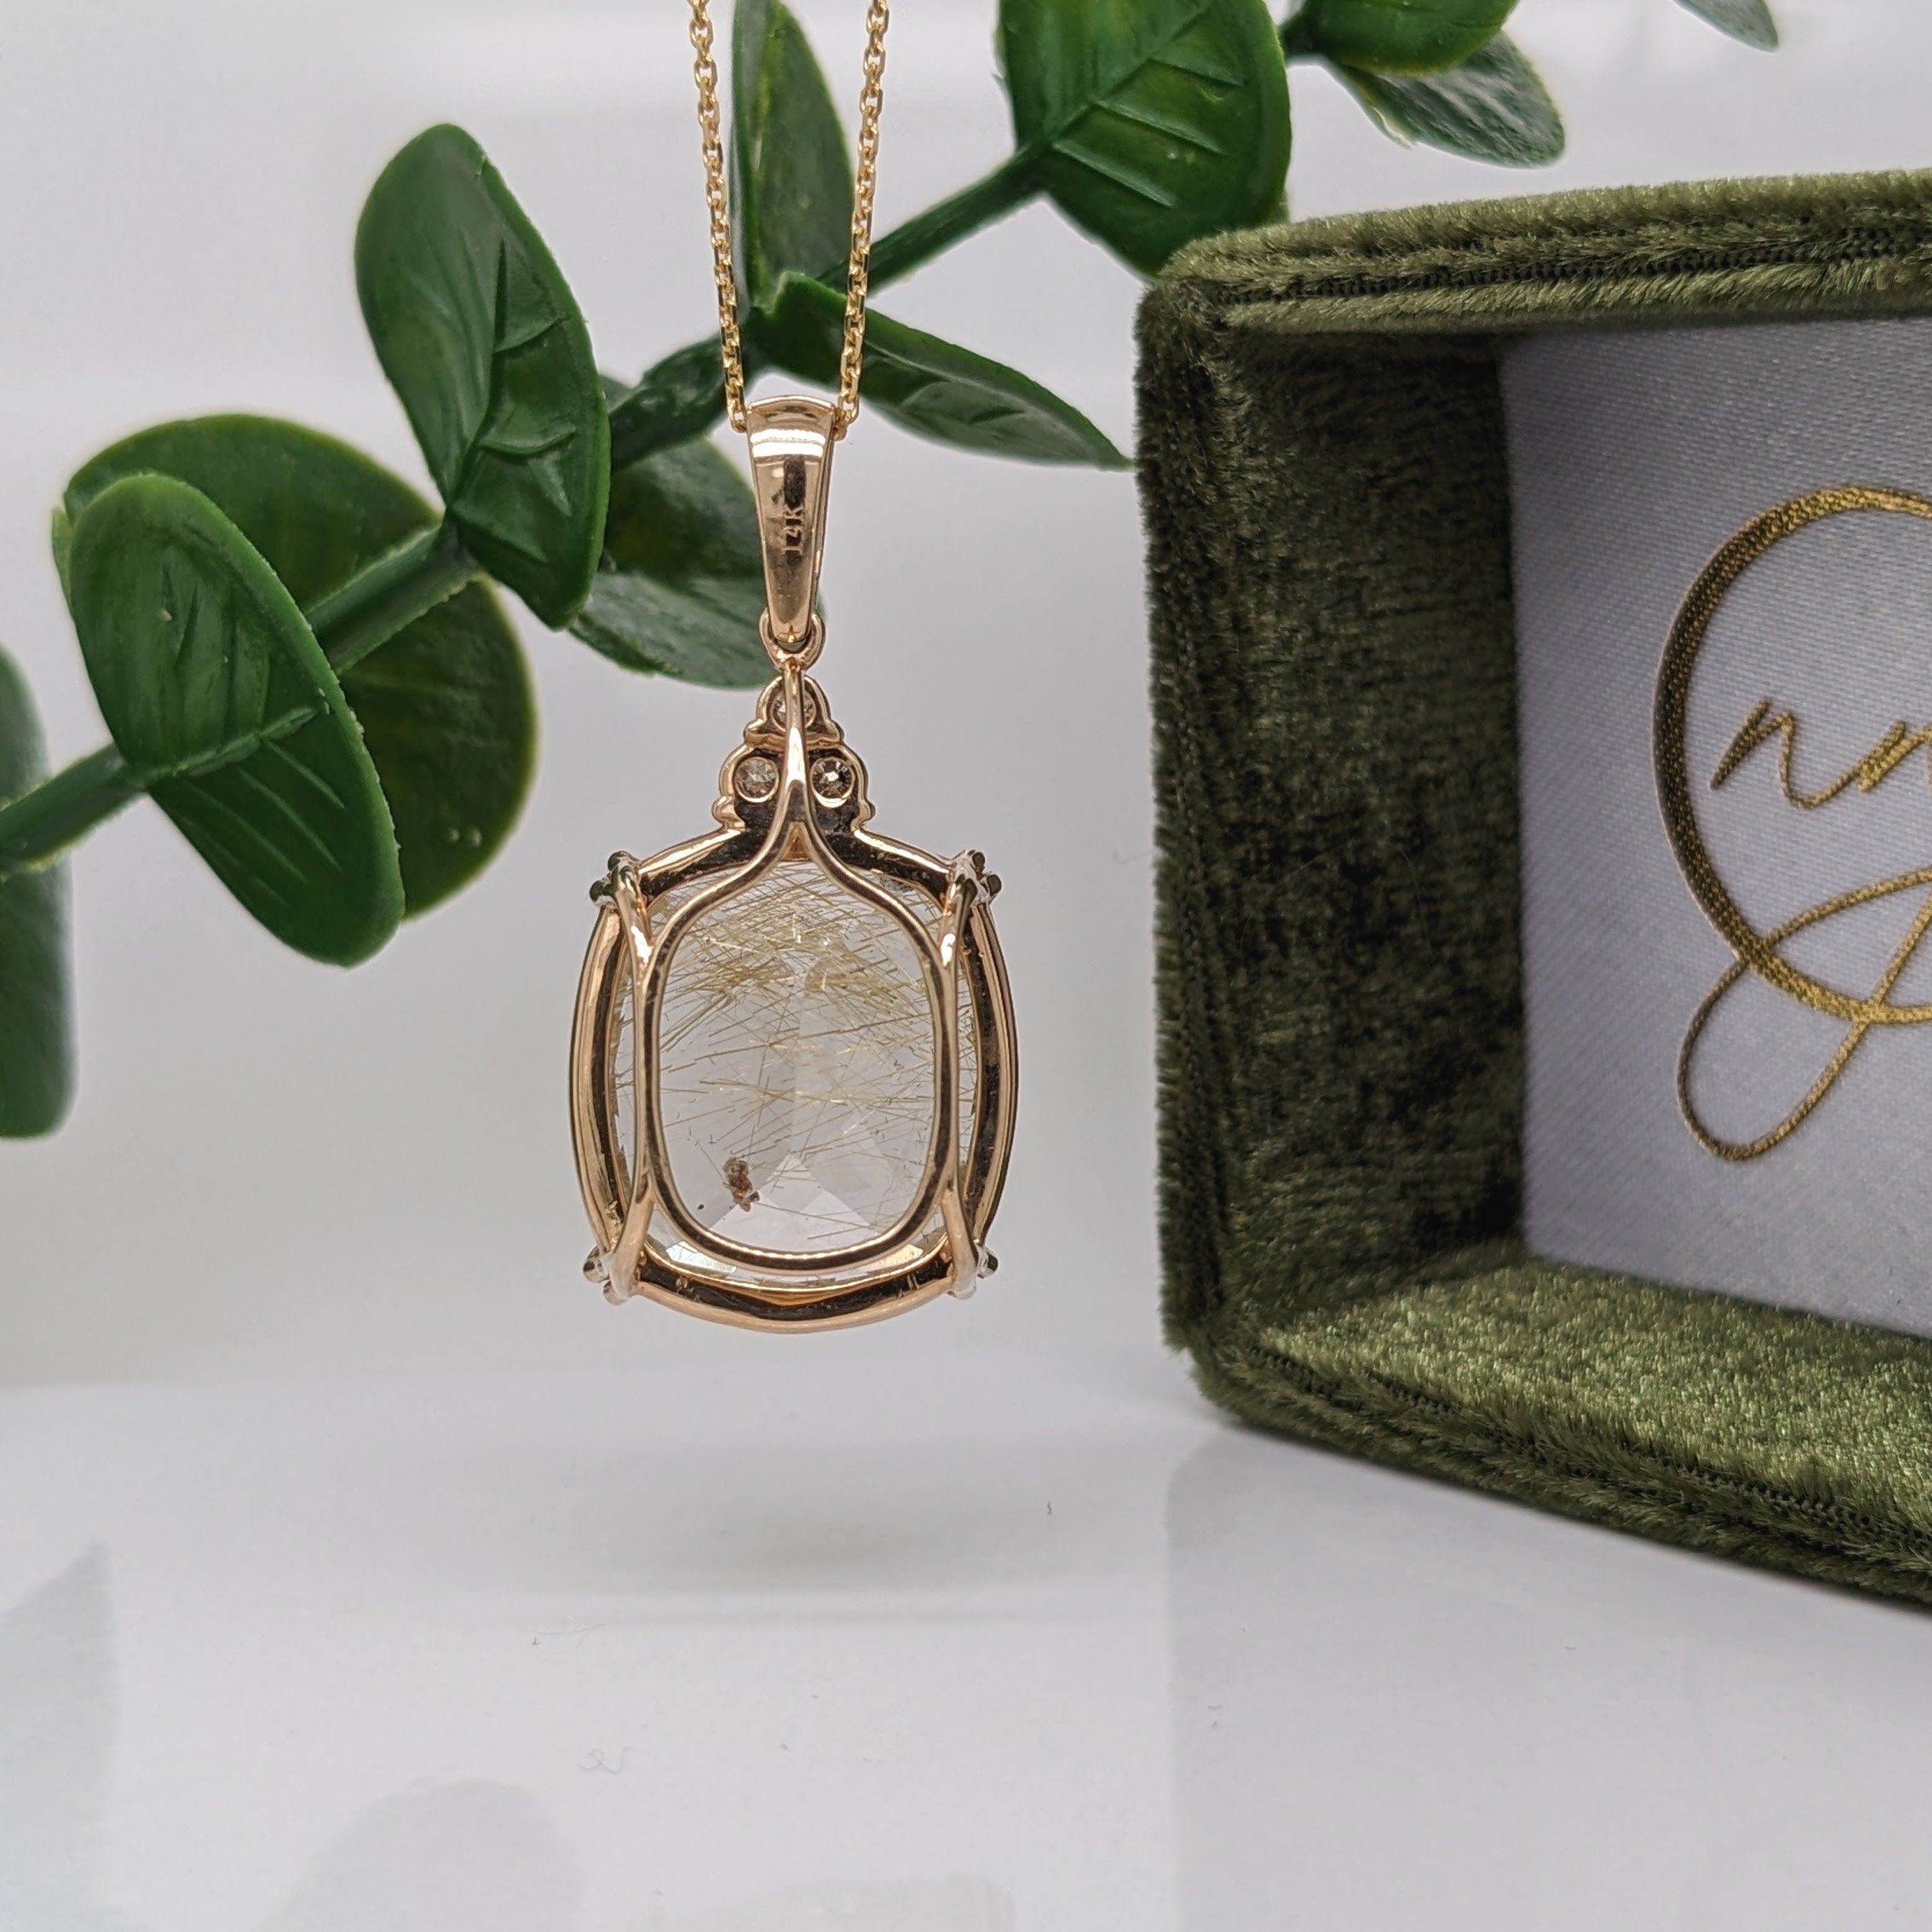 Lovely Gold Rutilated Quartz Pendant in Solid 14K Yellow Gold with Diamond Accents | Cushion 18x16mm | April Birthstone | Natural Gemstone